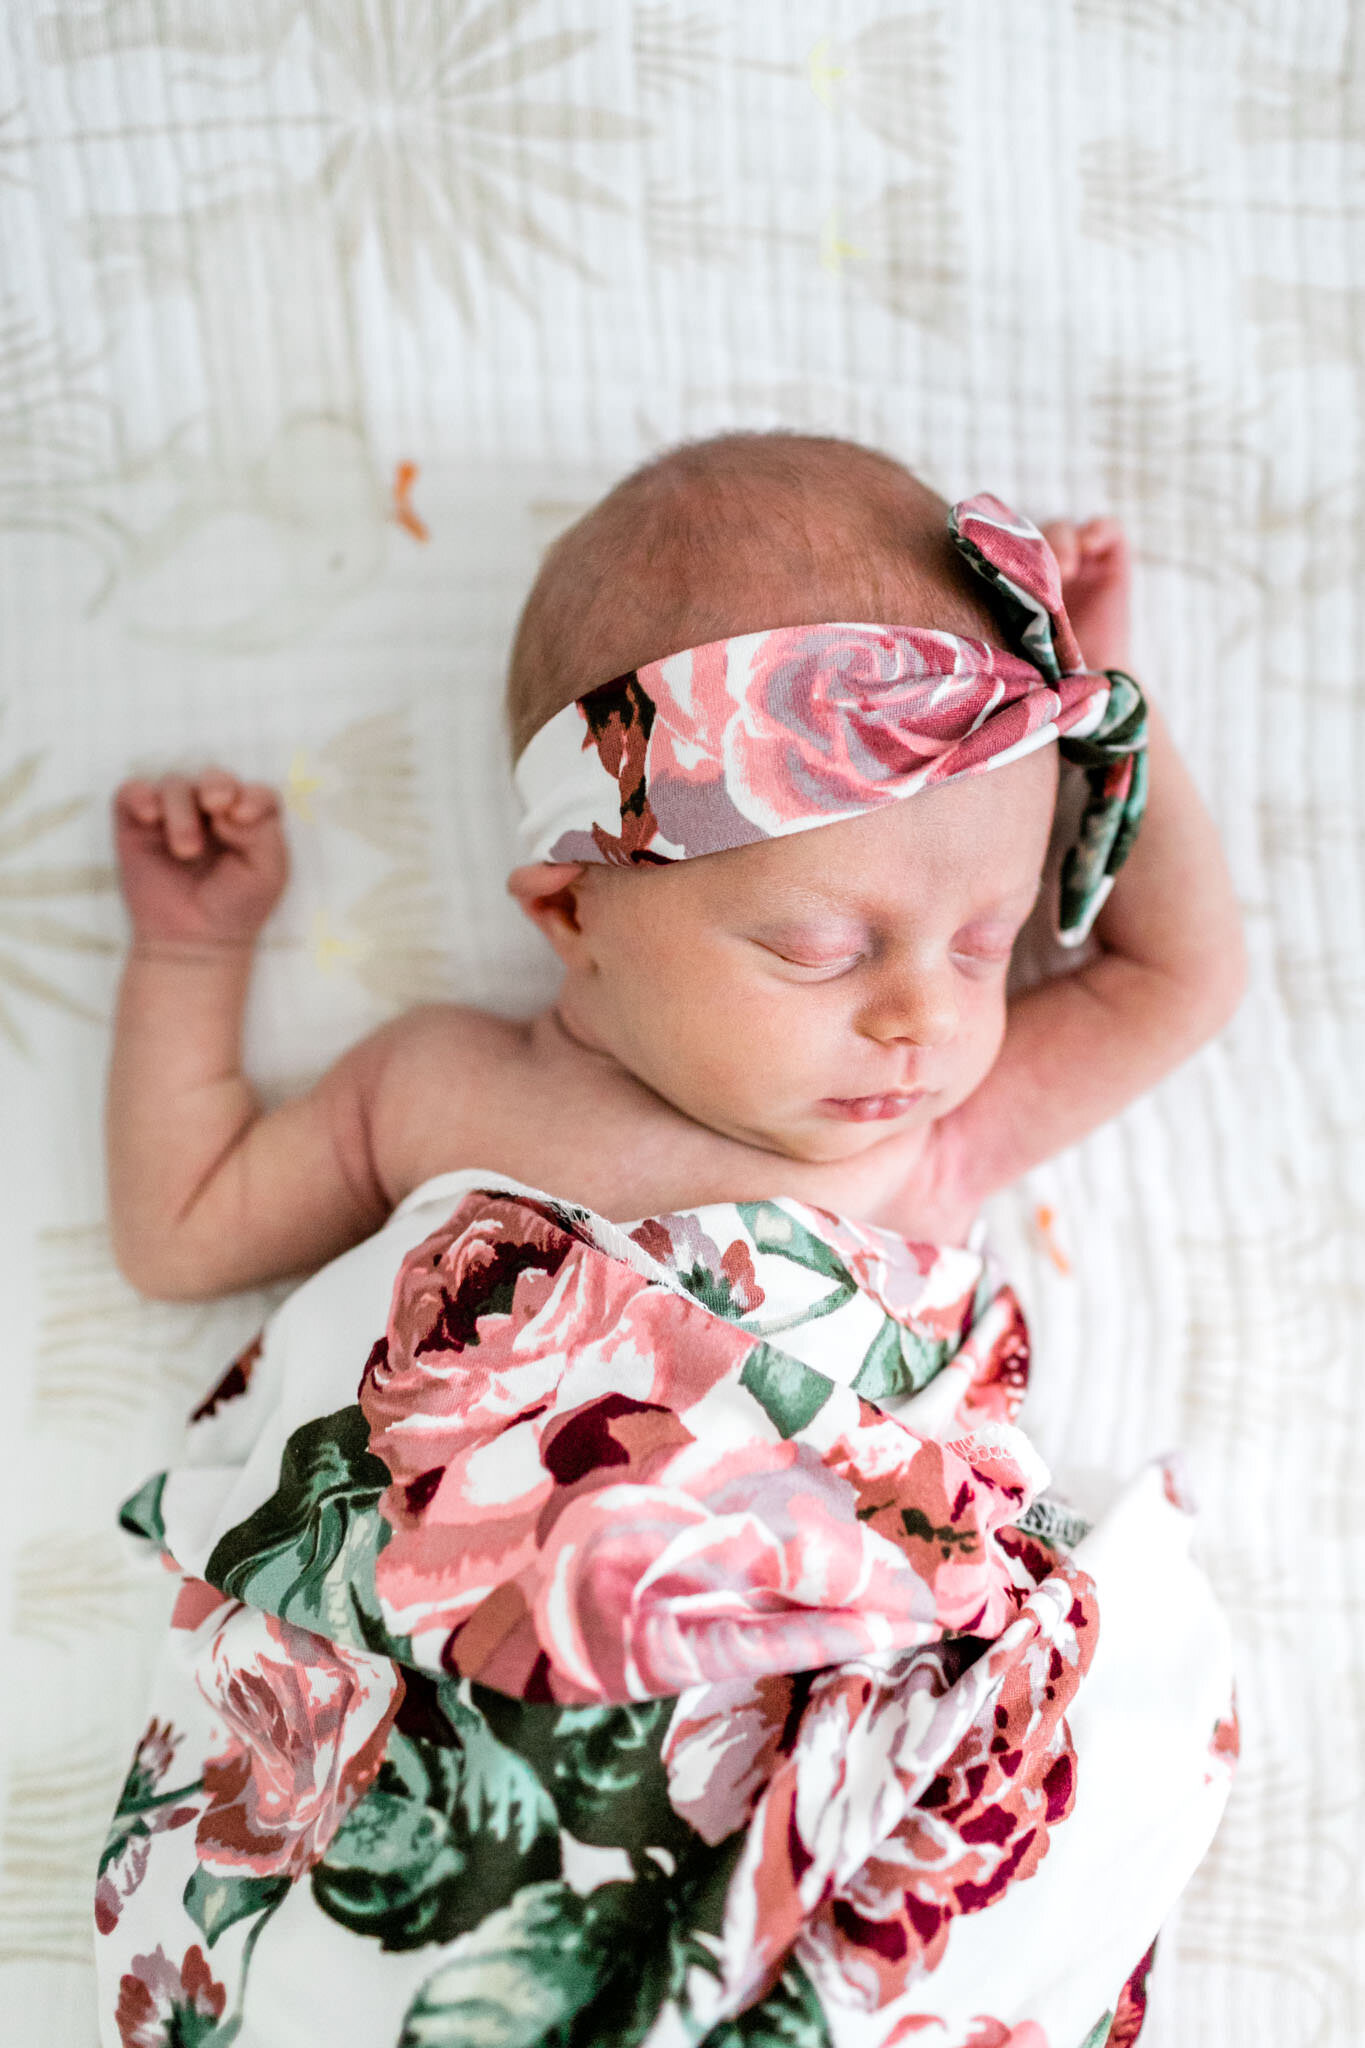 Hillsborough Newborn Photographer | By G. Lin Photography | Baby girl stretching arms in crib